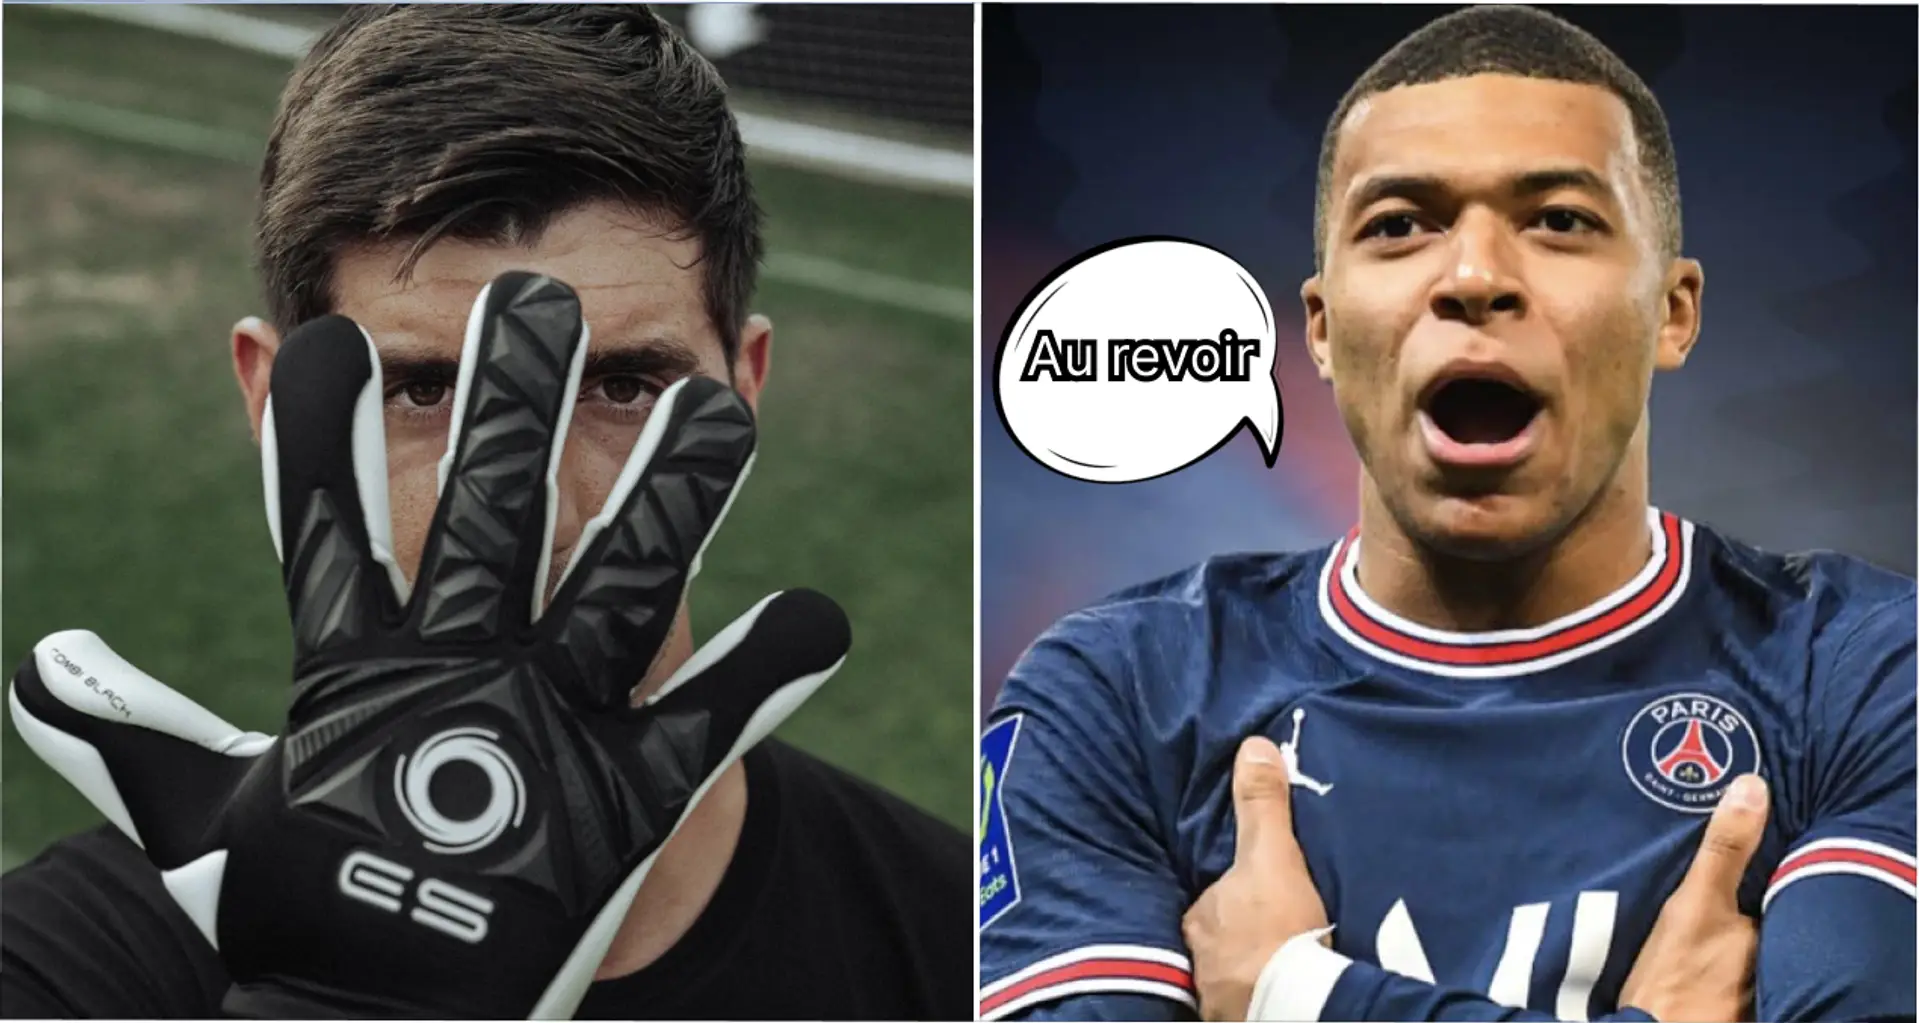 Mbappe says goodbye to PSG and 2 more big stories you might've missed